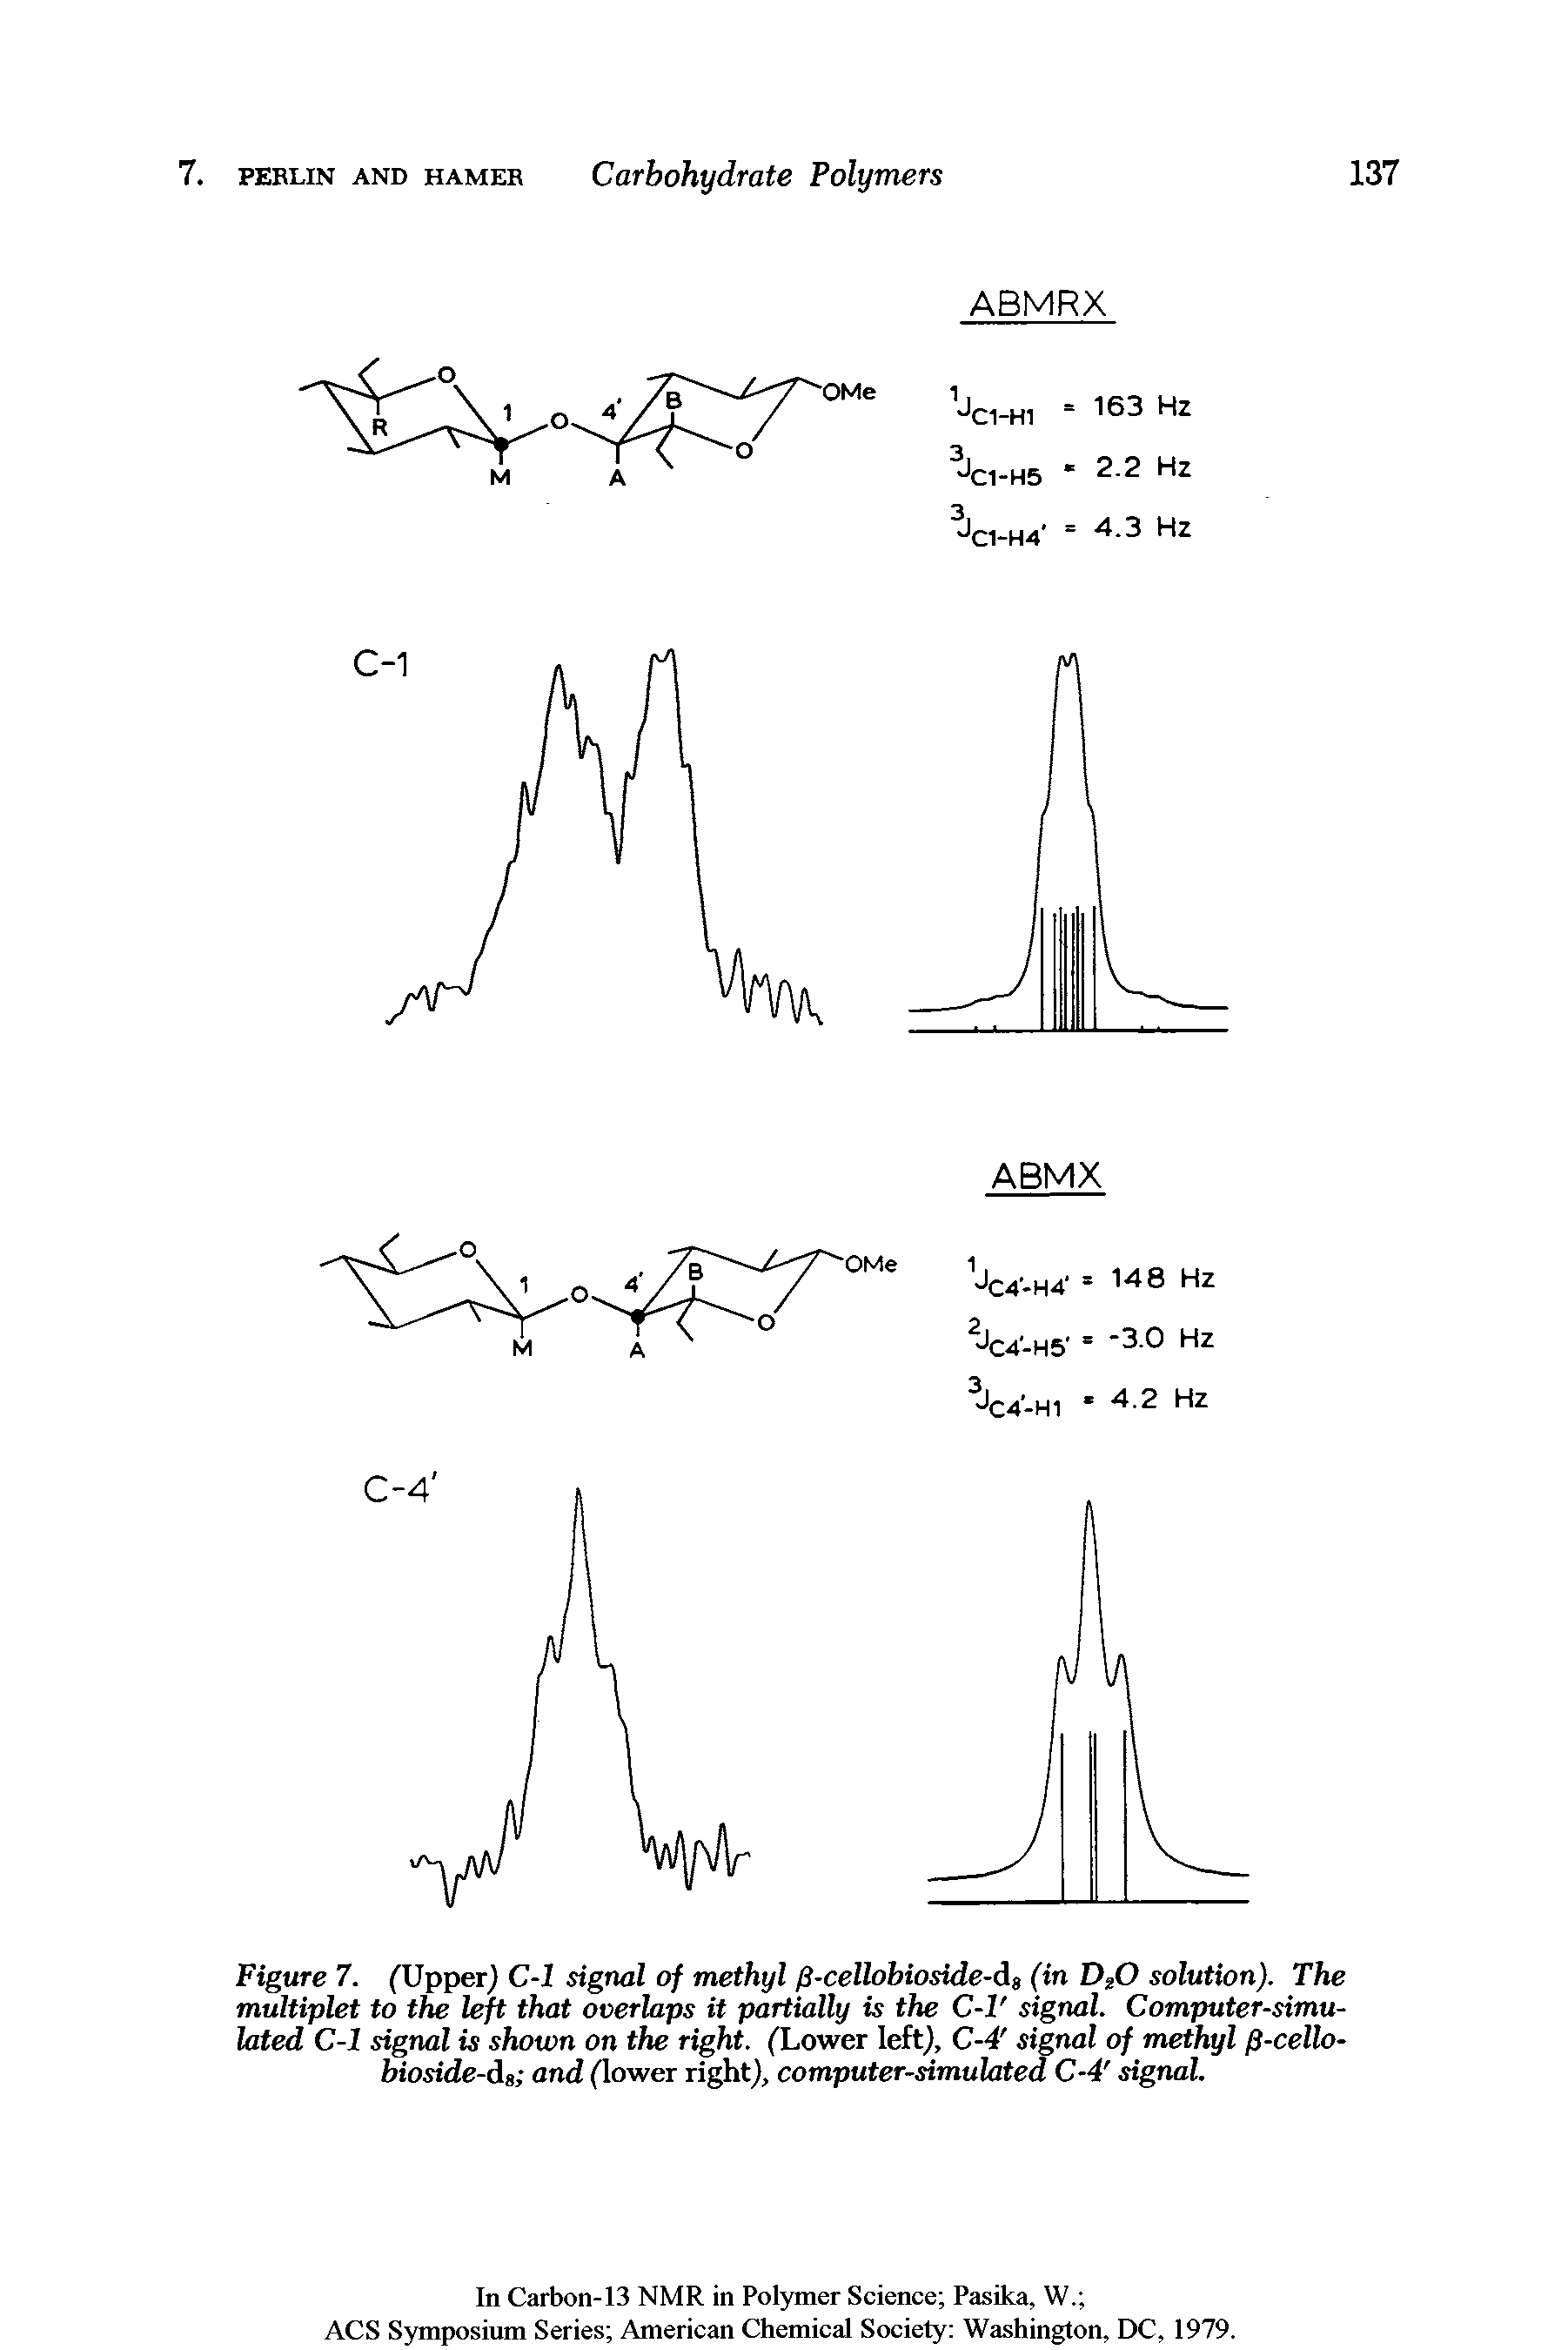 Figure 7. (Upper) C-1 signal of methyl fi-cellobioside-da (in DgO solution). The multiplet to the left that overlaps it partially is the C-1 signal. Computer-simulated C-1 signal is shown on the right. (Lower left), C-4 signal of methyl p-cello-bioside-ds and (lower right), computer-simulated C-4 signal.